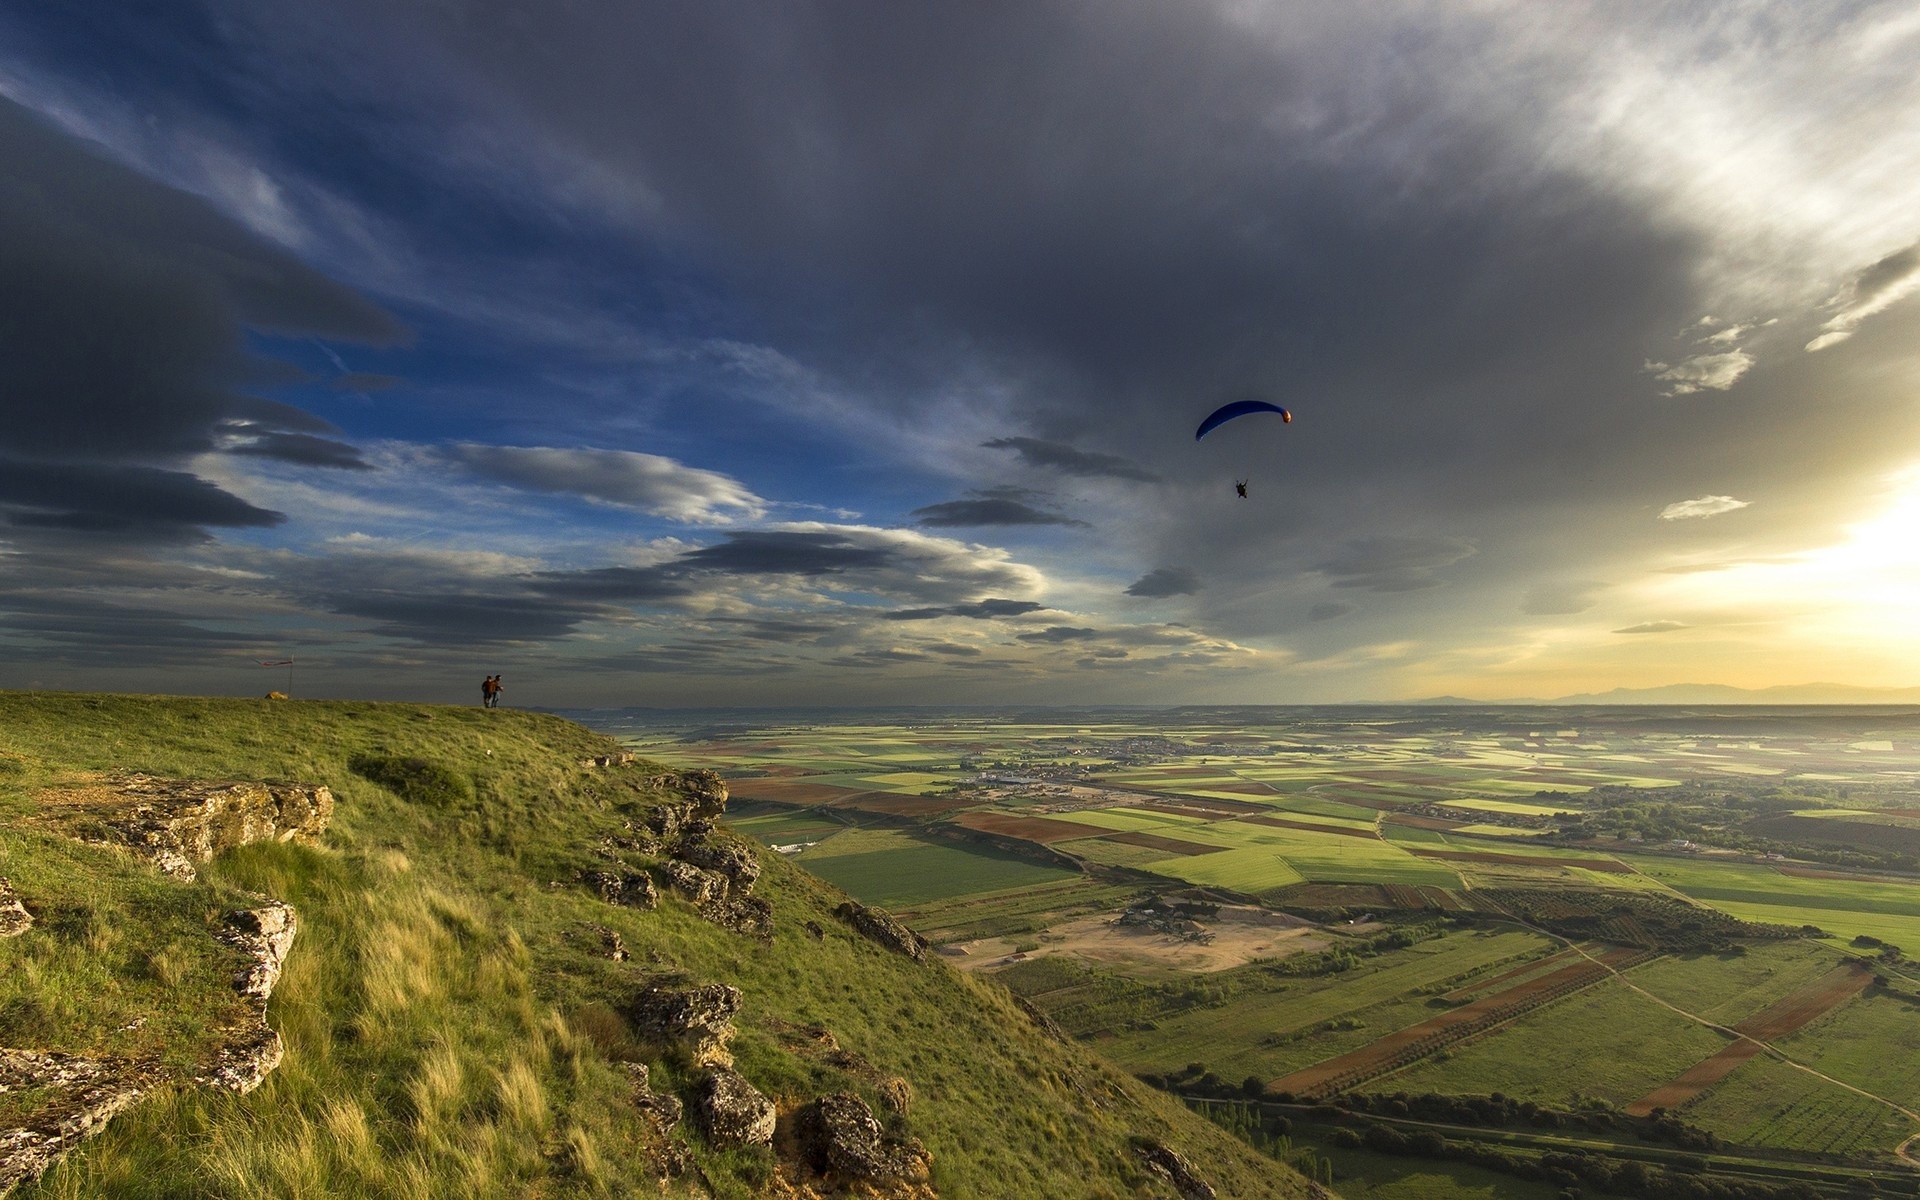 parachute, Skydiving, Sky, Clouds, Sunlight, Sunset, Sunrise, Flight, Fly, People, Mountains, Hills, Nature, Landscapes, Fields, Grass, Plants, Green, Scenic, View Wallpaper